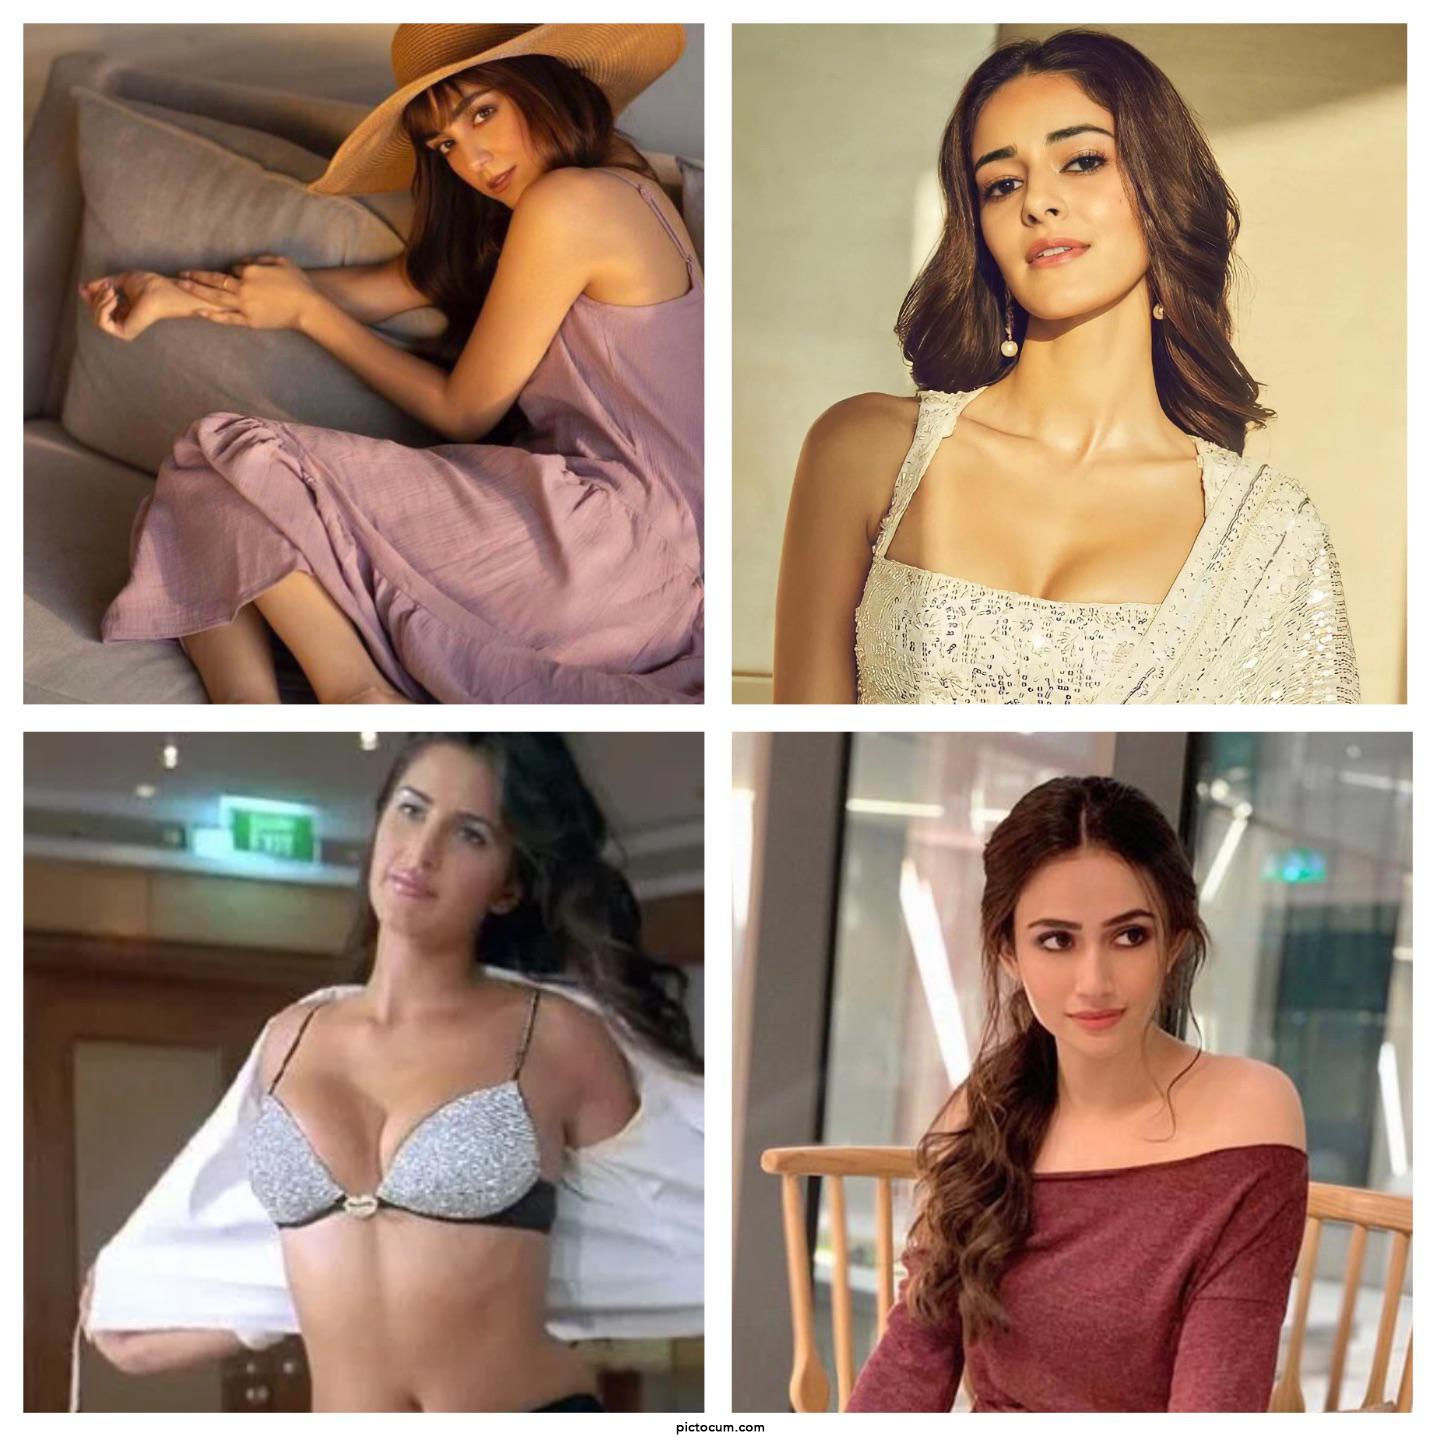 These Desi goddesses own my desperate cock